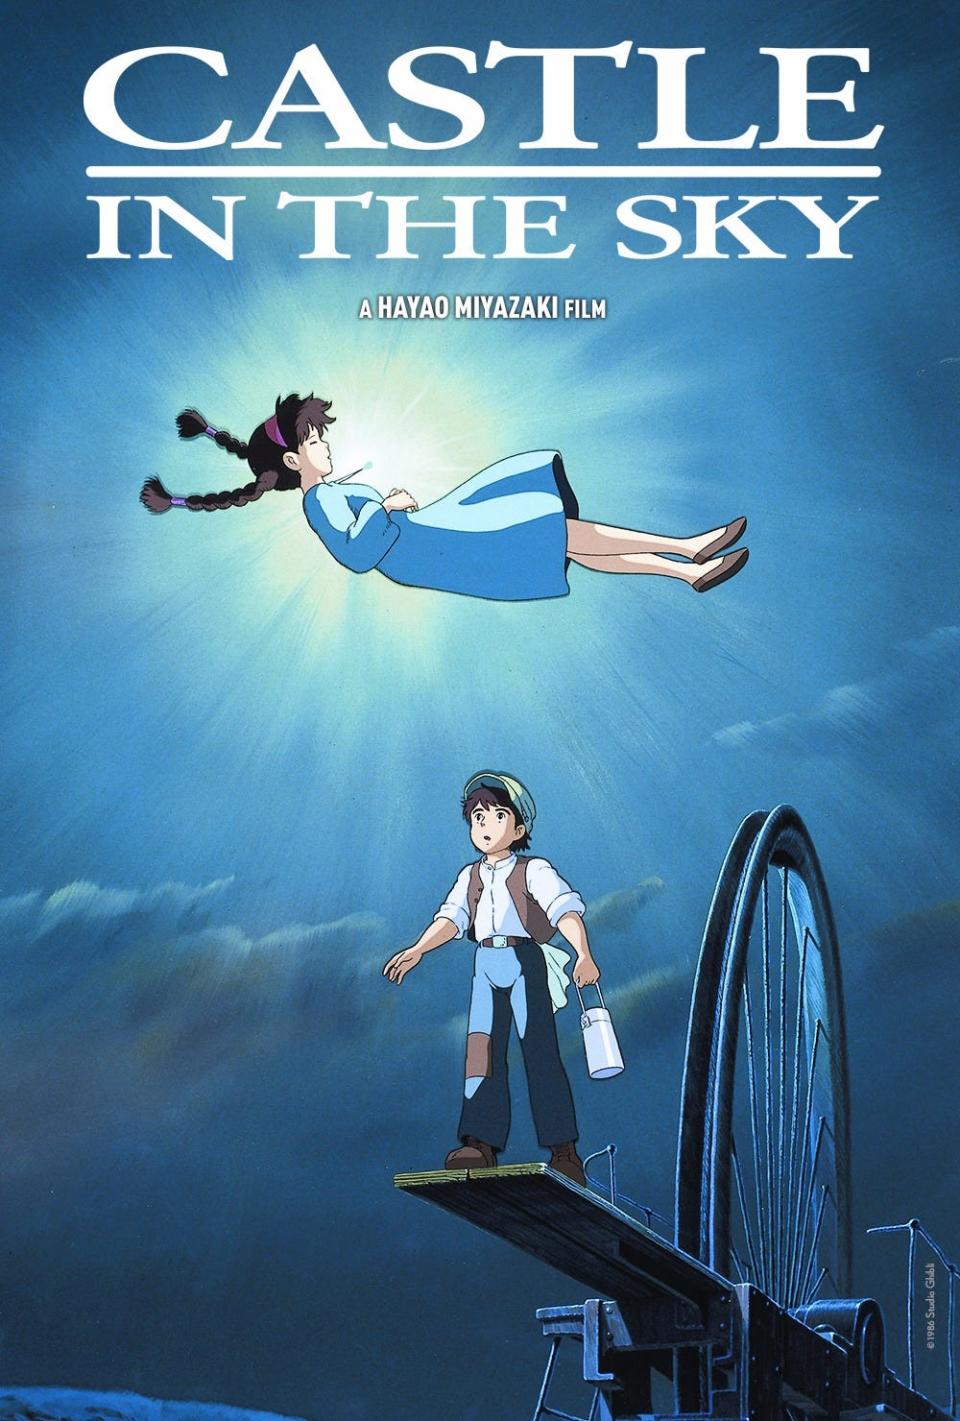 Poster for "Castle in the Sky."